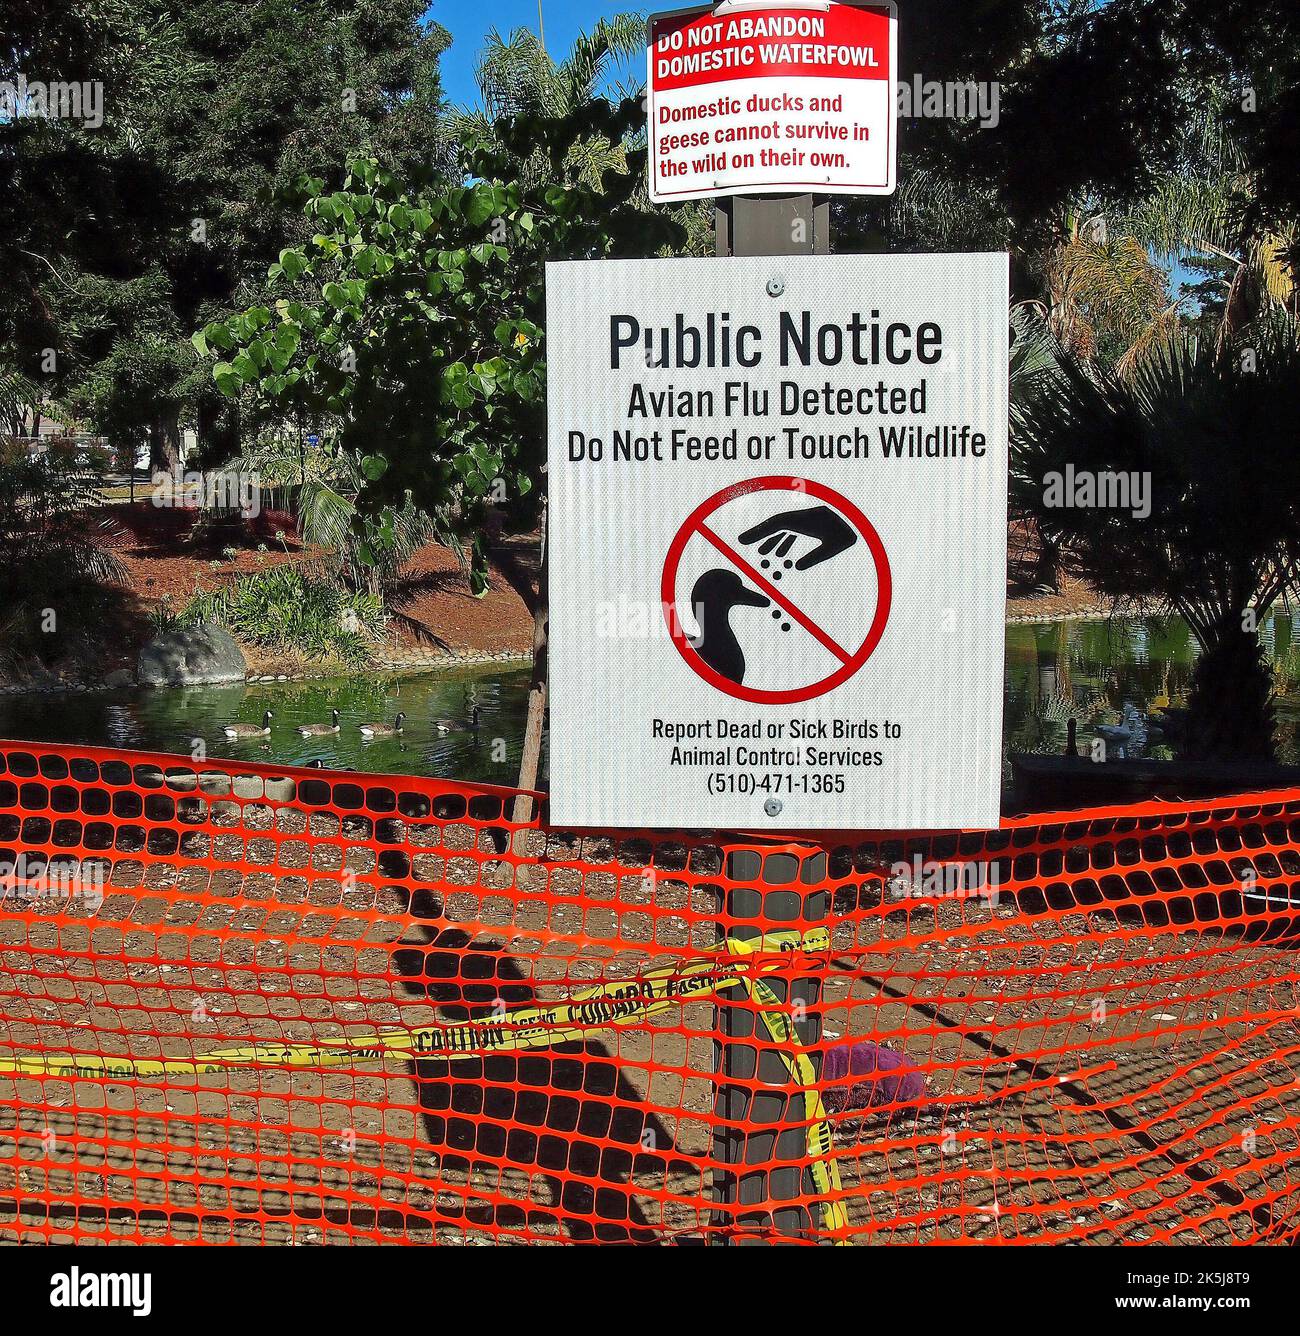 park pond with waterfowl fenced off in Union City, California and Avian Flu detected do not feed or touch wildlife public notice sign, report dead or sick birds to Animal Control Services Stock Photo